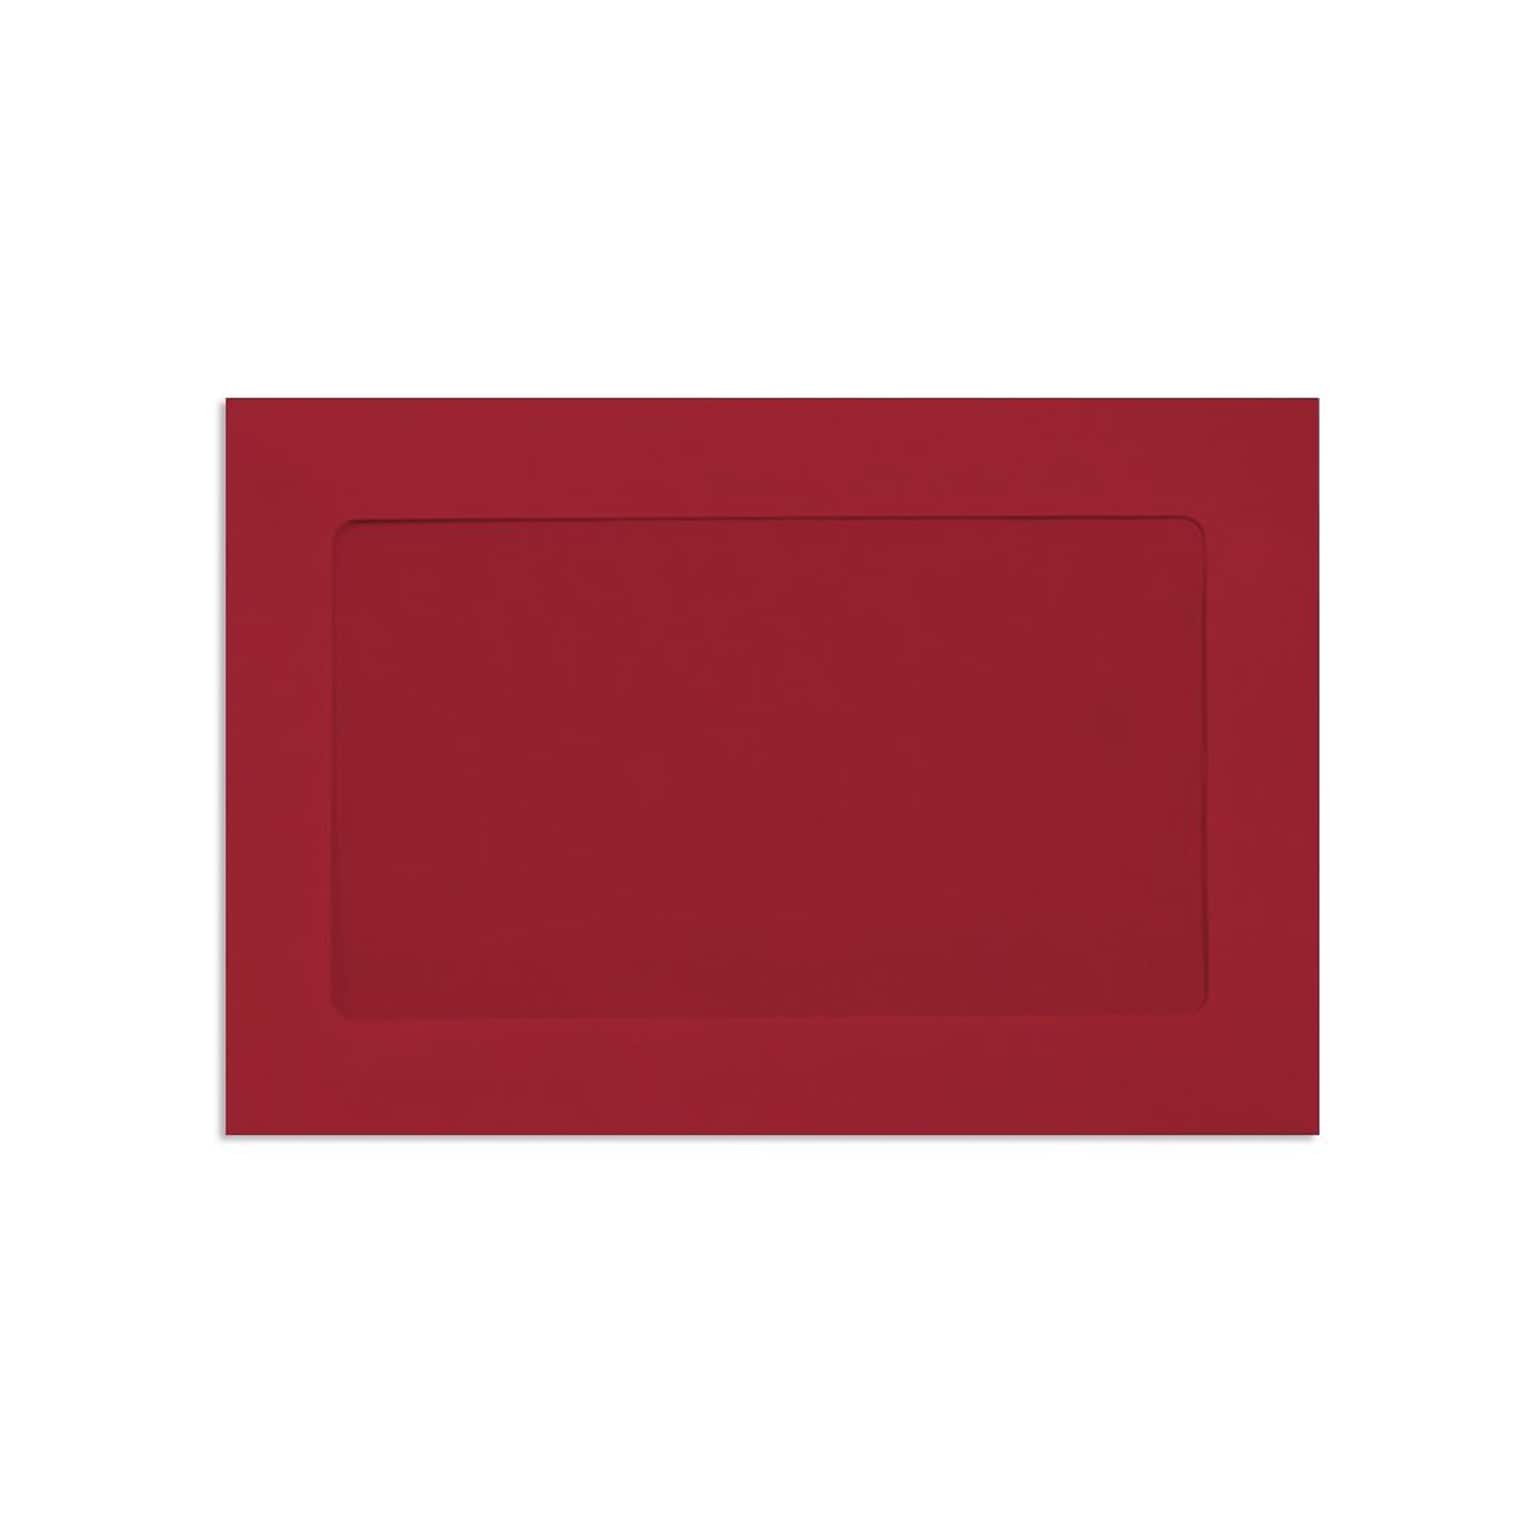 LUX Moistenable Glue #1 Window Envelope, 6 x 9, Ruby Red, 50/Pack (FFW-69-18-50)